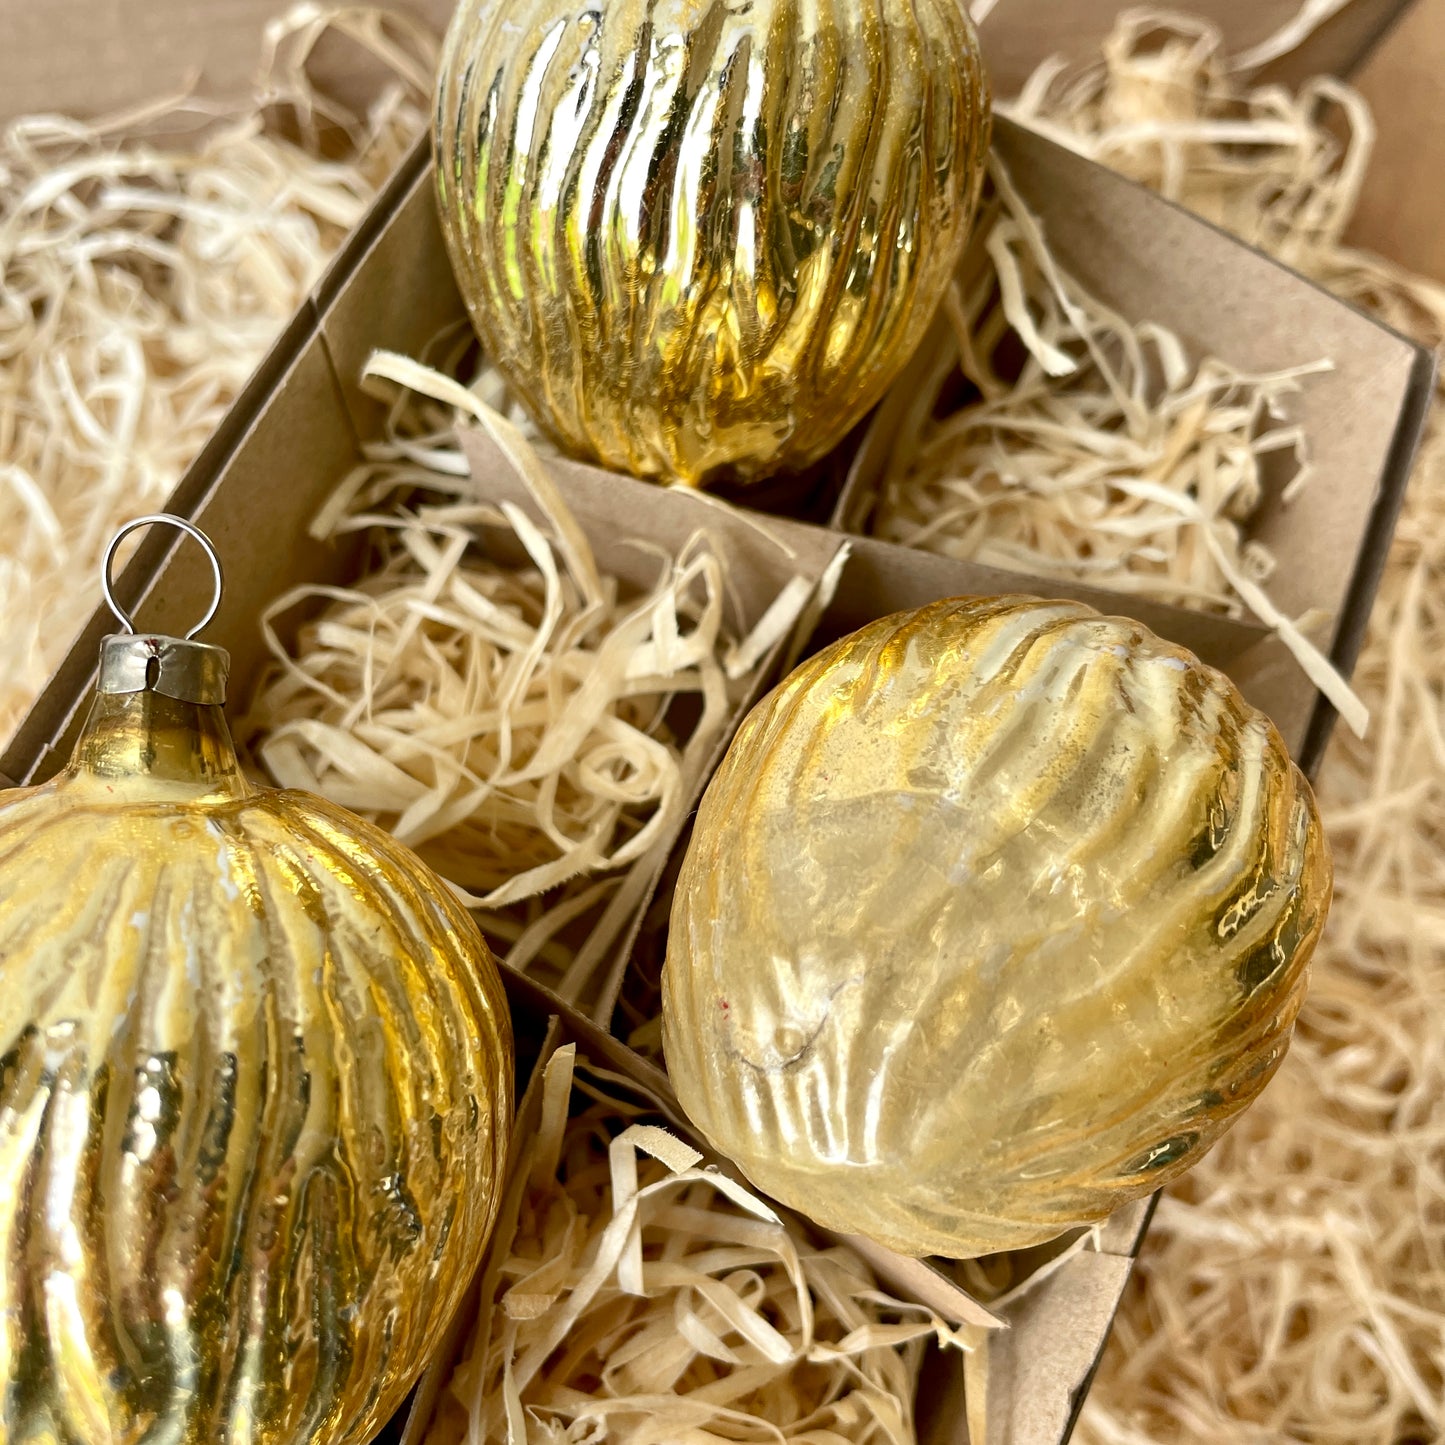 Three vintage large nut shaped glass baubles